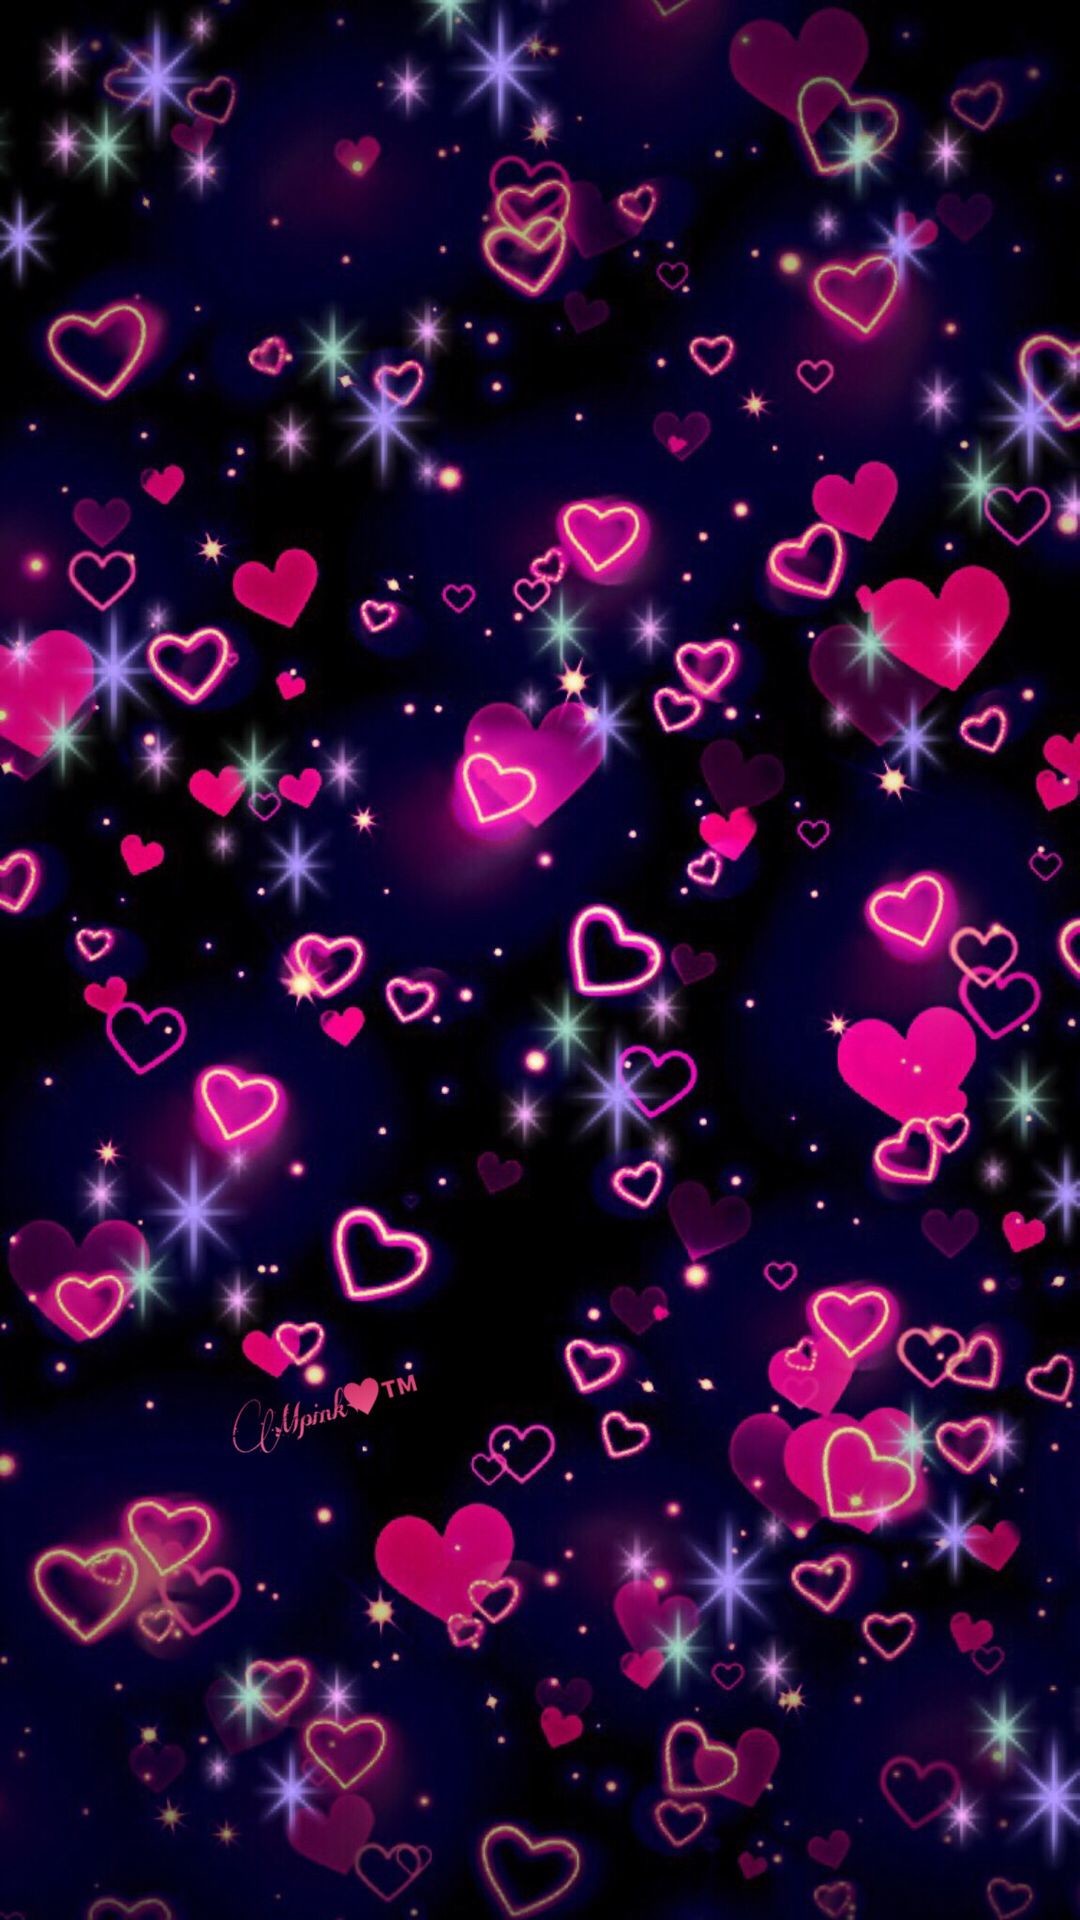 Cute Heart Wallpaper For iPhone Image